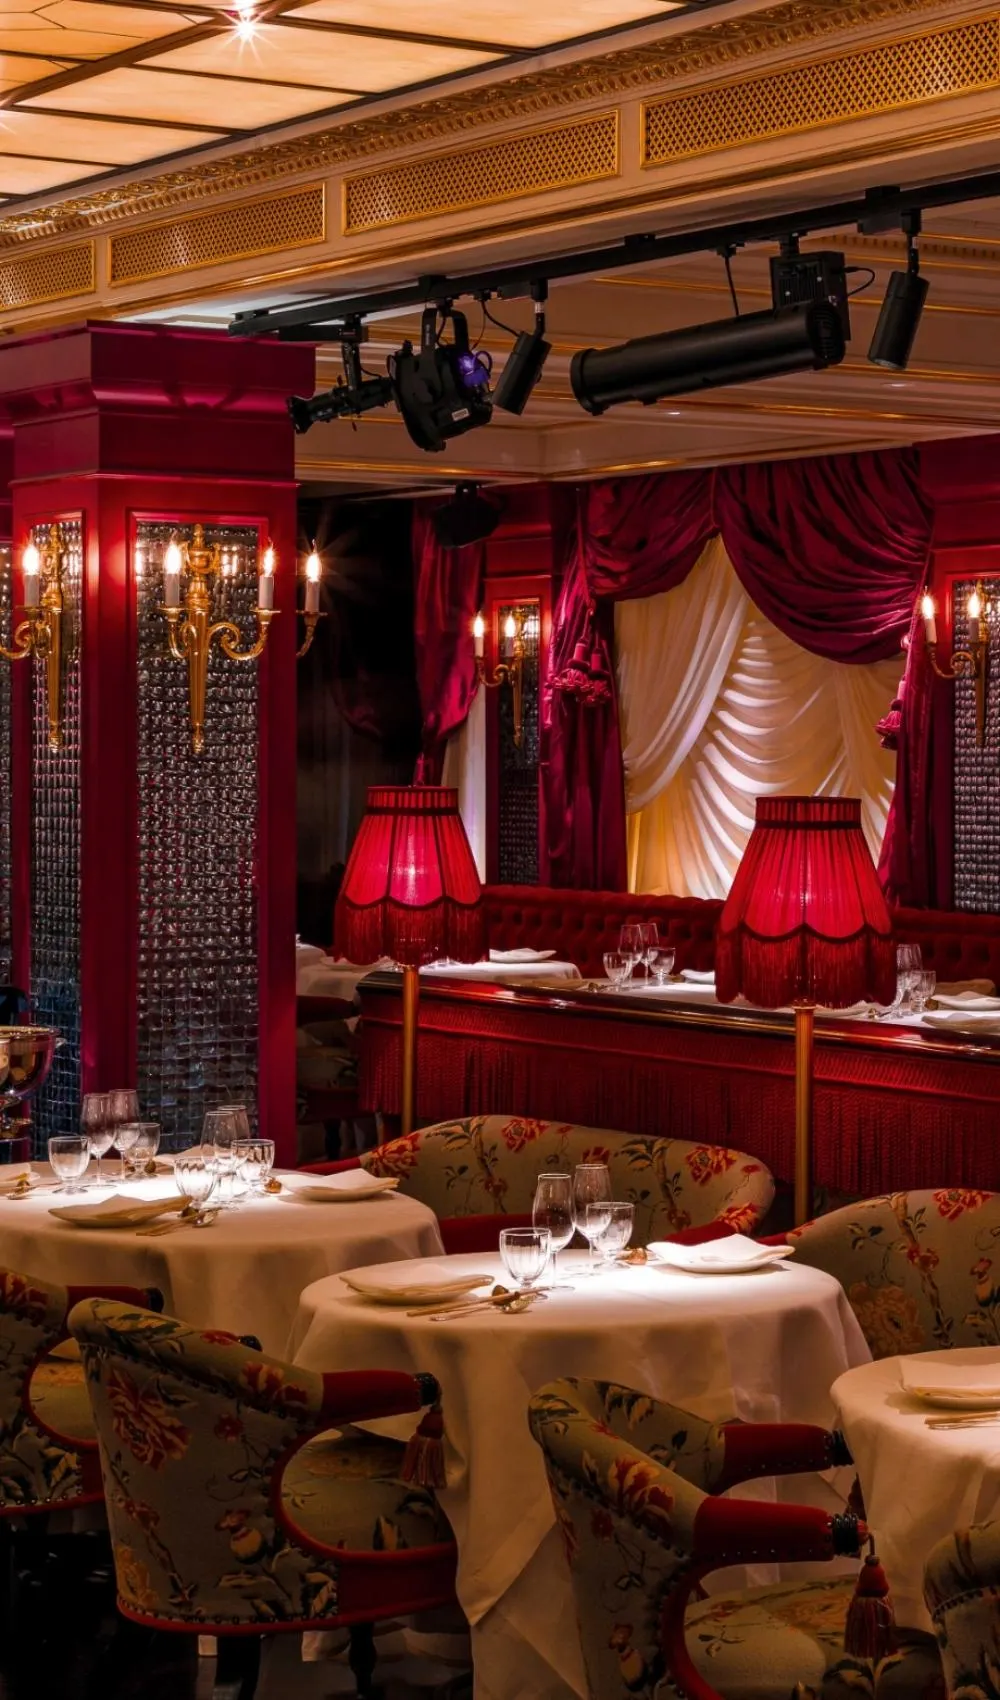 most instagrammable restaurants in london - most beautiful restaurants in mayfair central london - prettiest restaurants in mayfair london - cutest places to eat in central london - cutest cafes in mayfair - most instagrammable afternoon tea in central london - park chinois mayfair